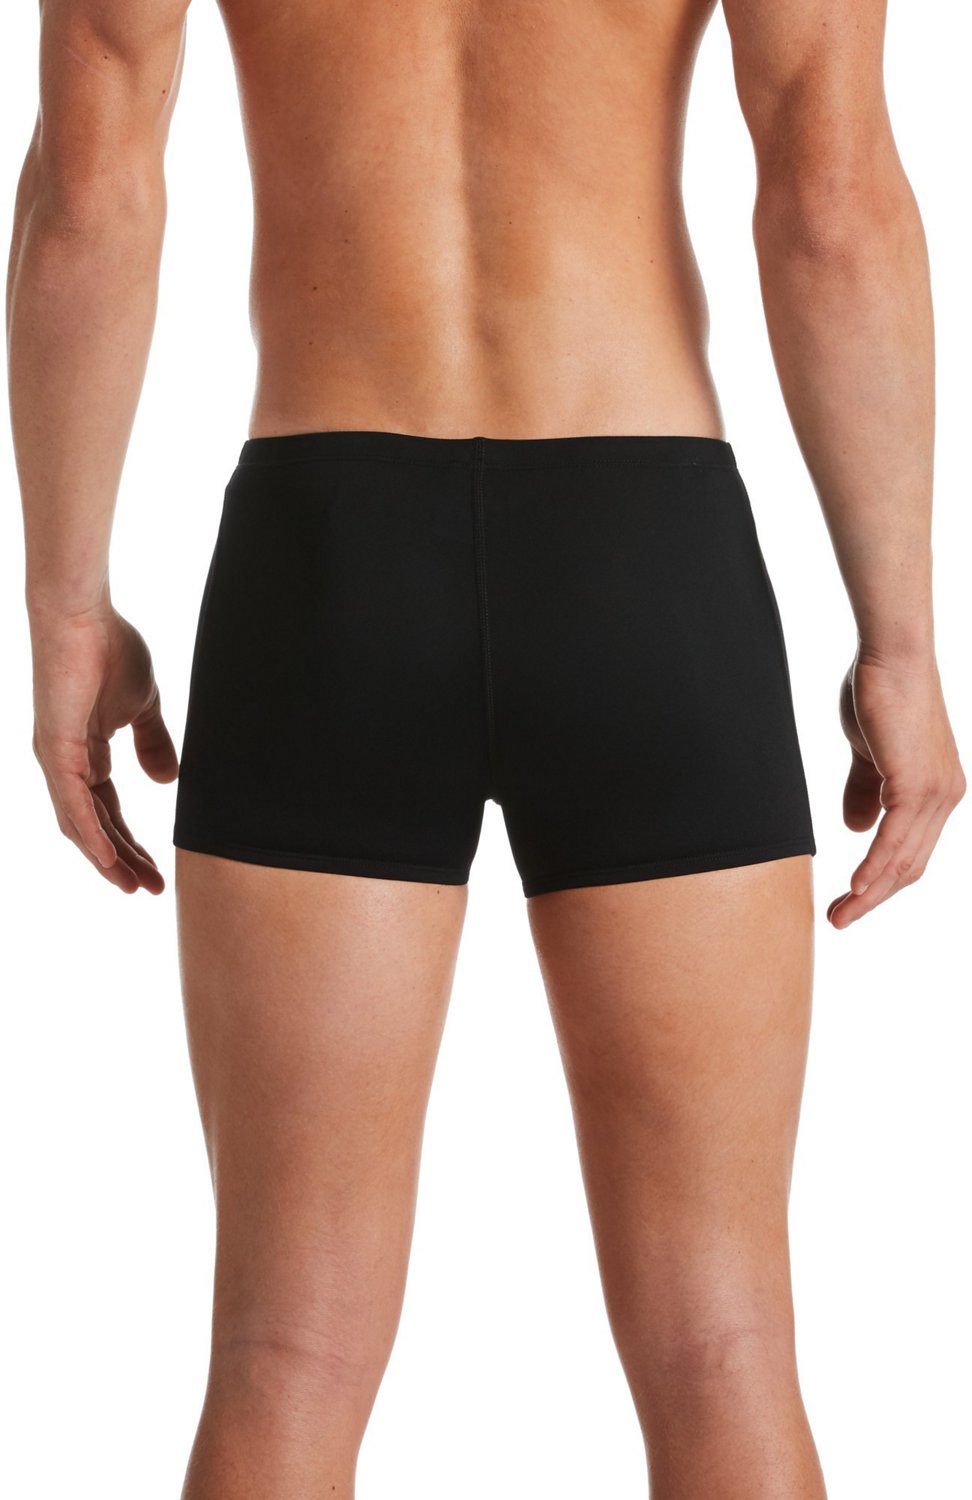 Nike Men's HydraStrong Solid Brief Swimsuit at